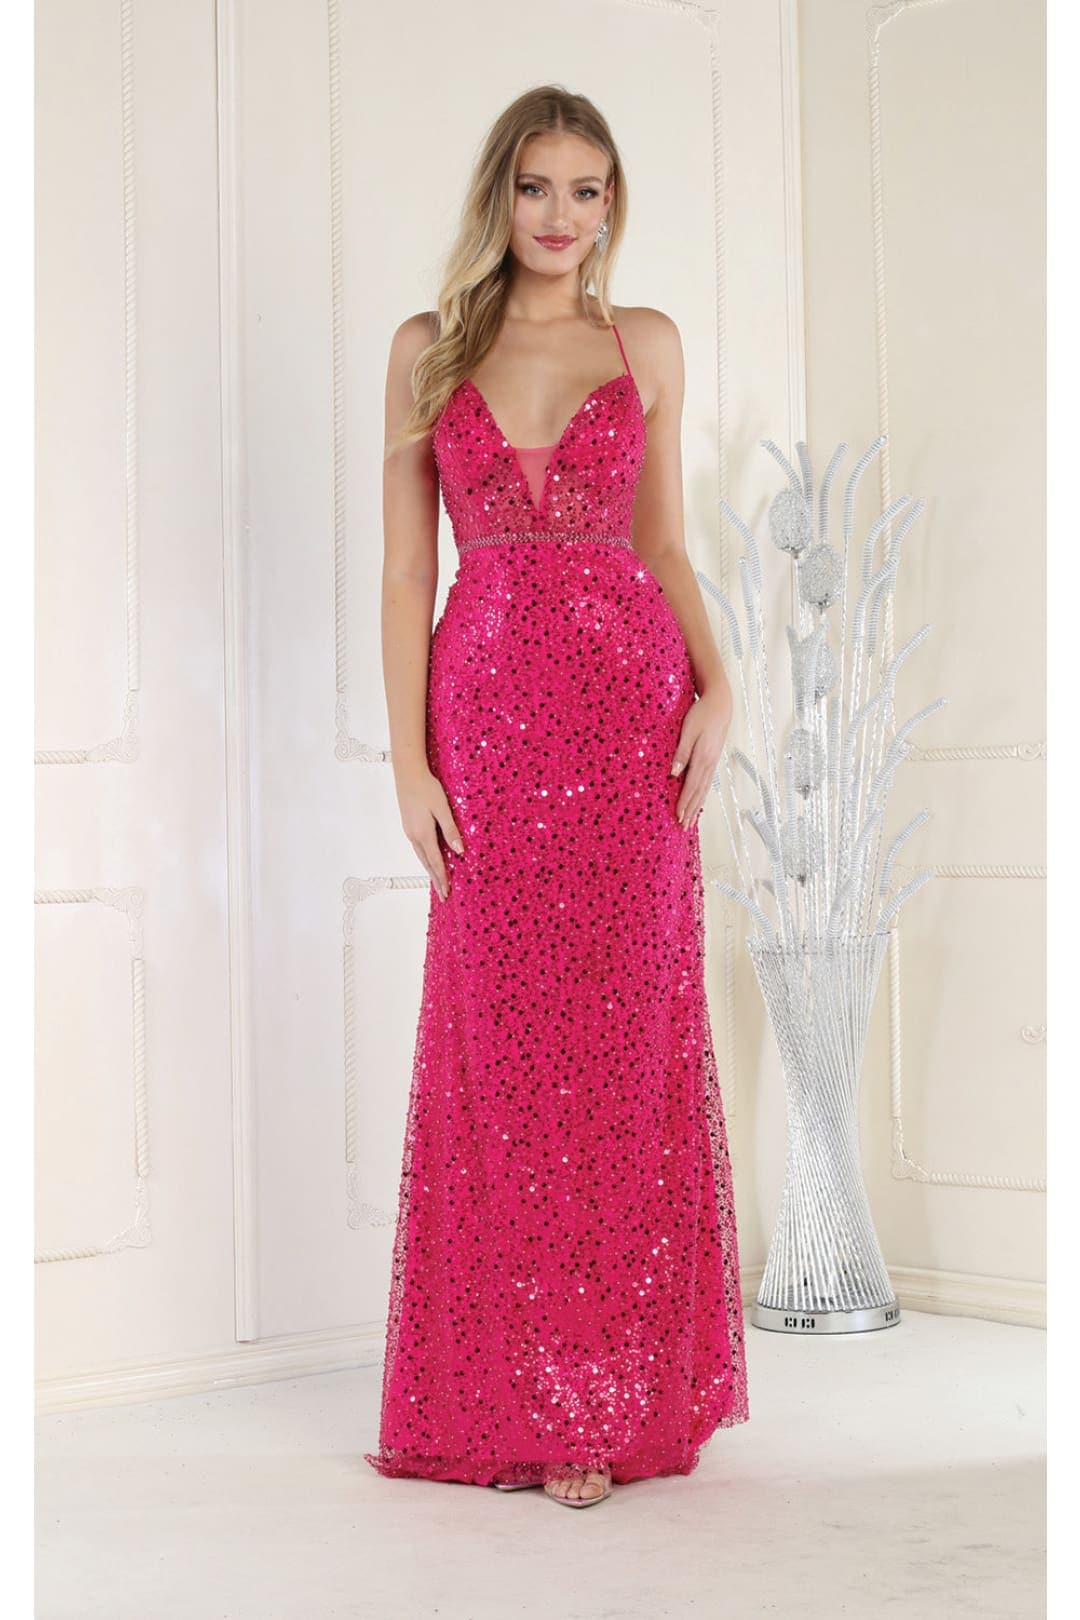 Royal Queen RQ7993 Sexy Lace Up Prom Dress - FUCHSIA / 4 - Dress